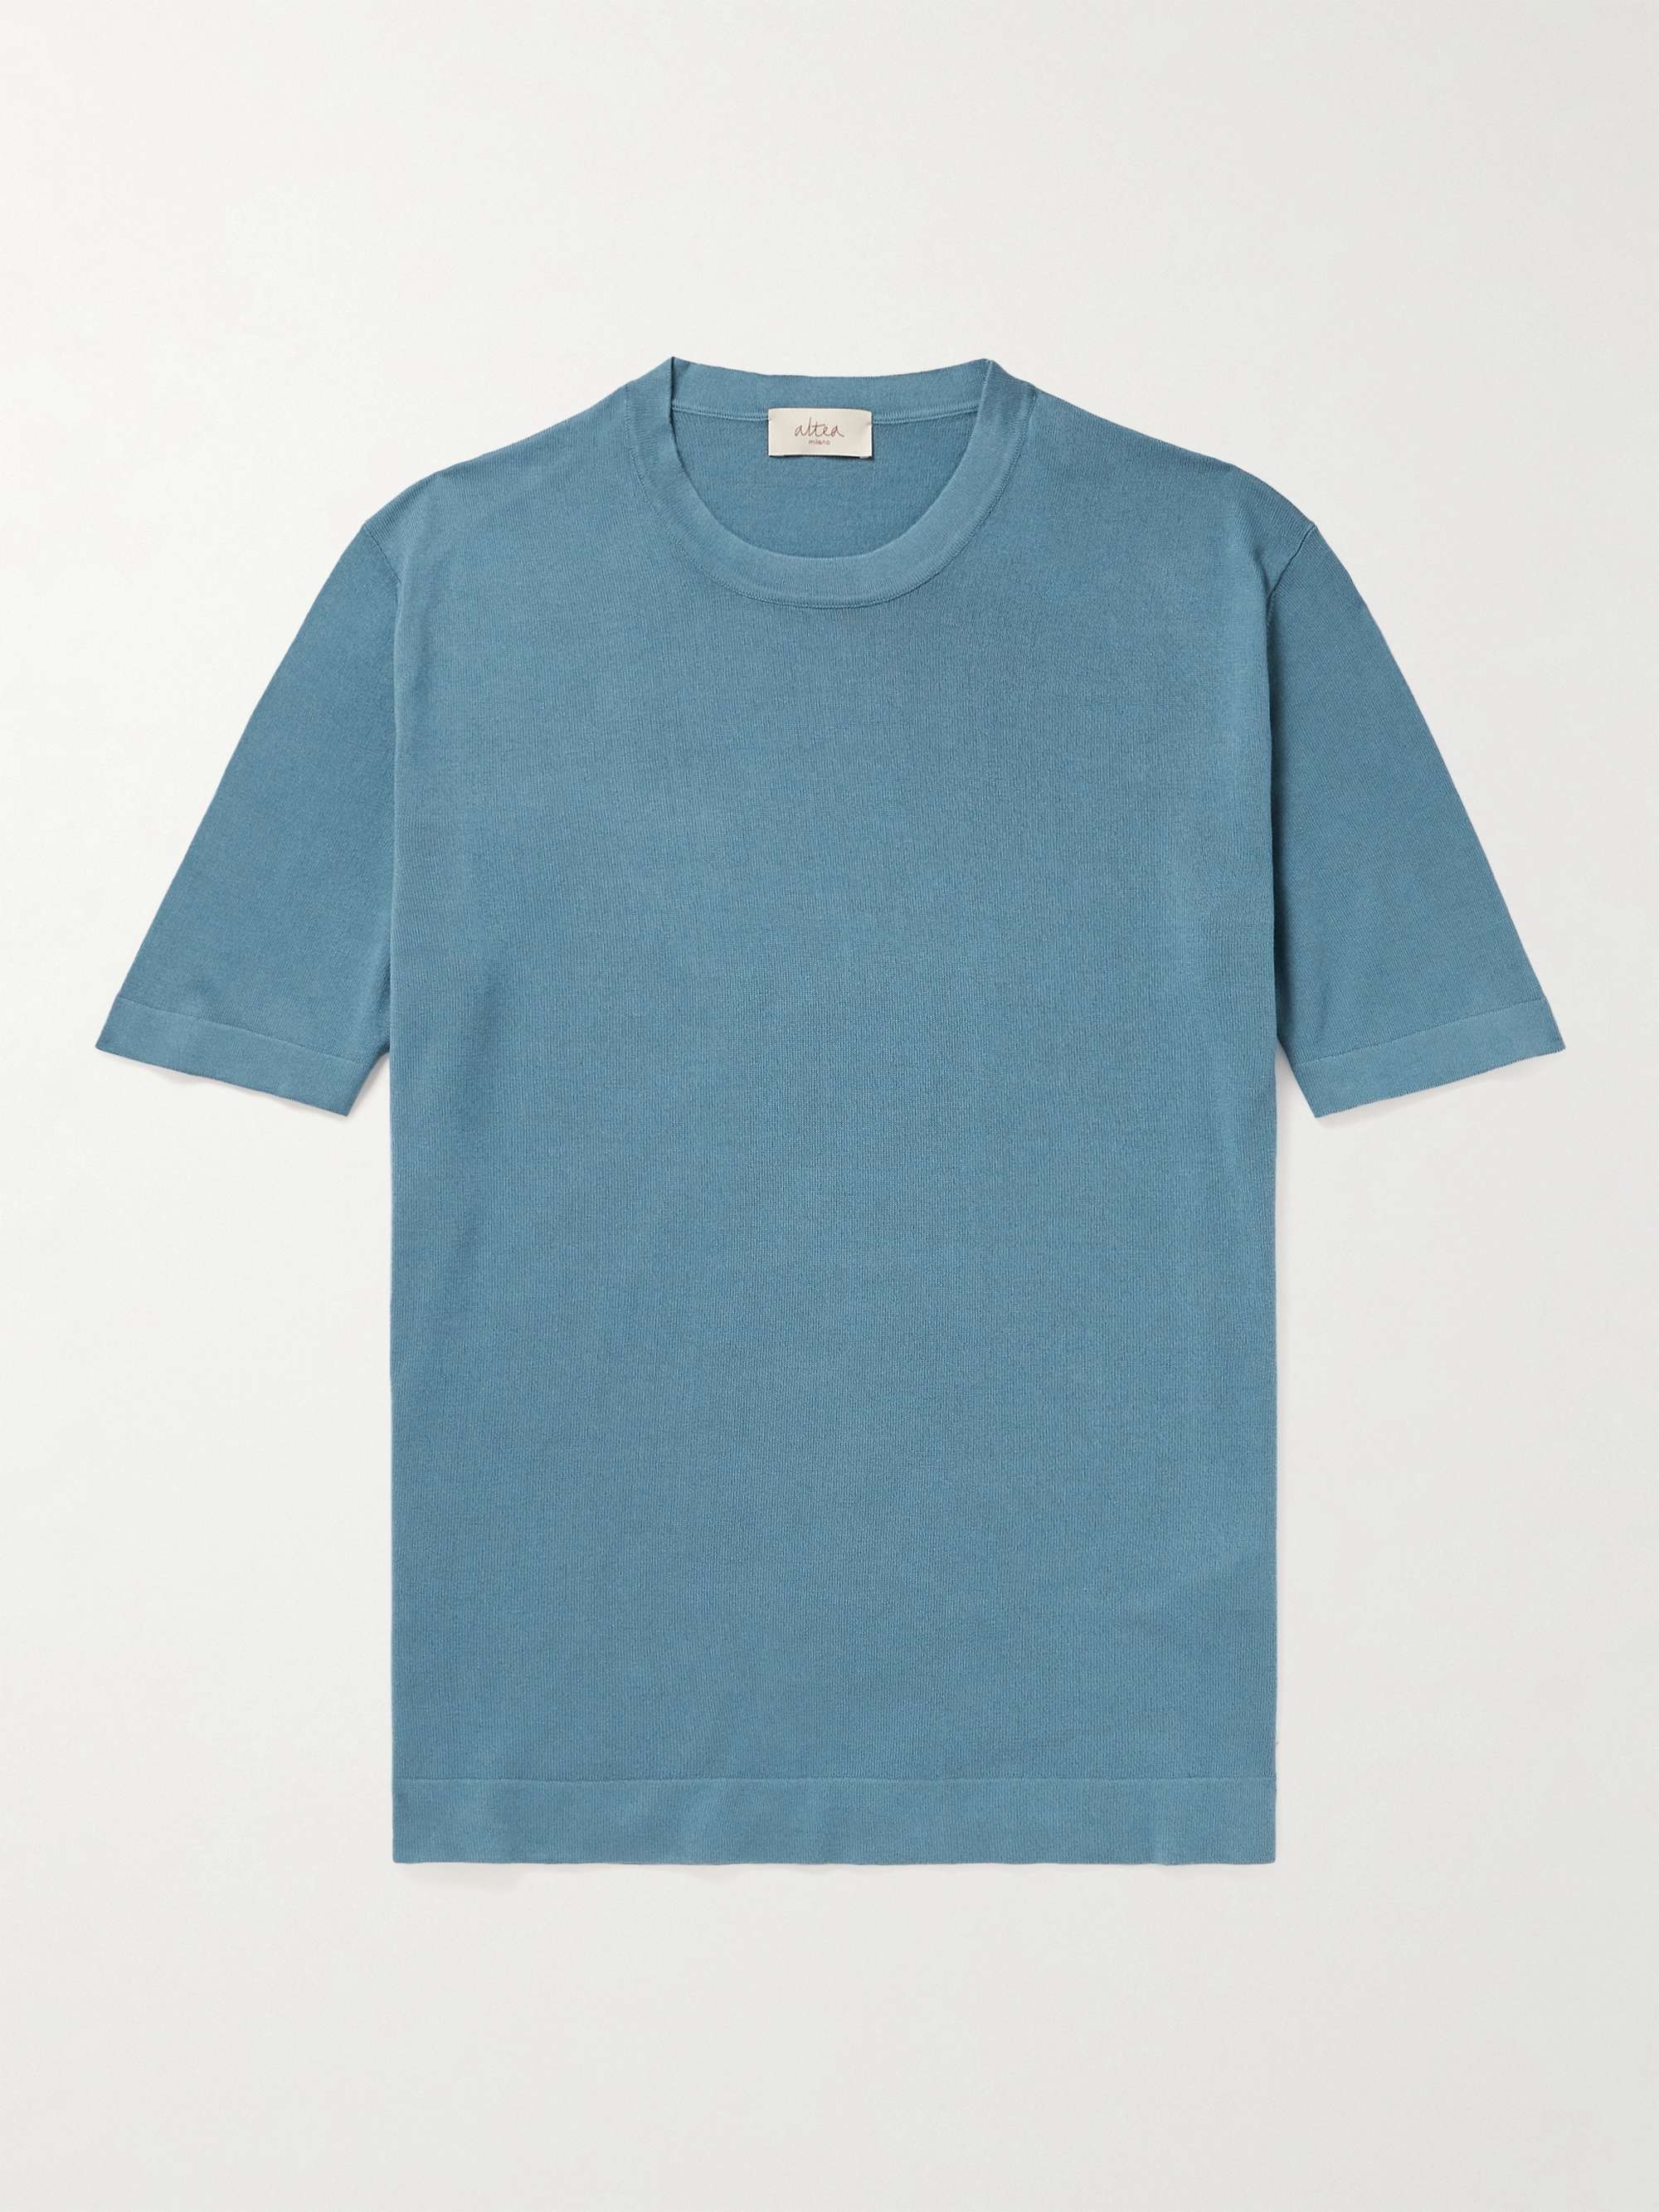 ALTEA Slim-Fit Lyocell and Cotton-Blend Jersey T-Shirt